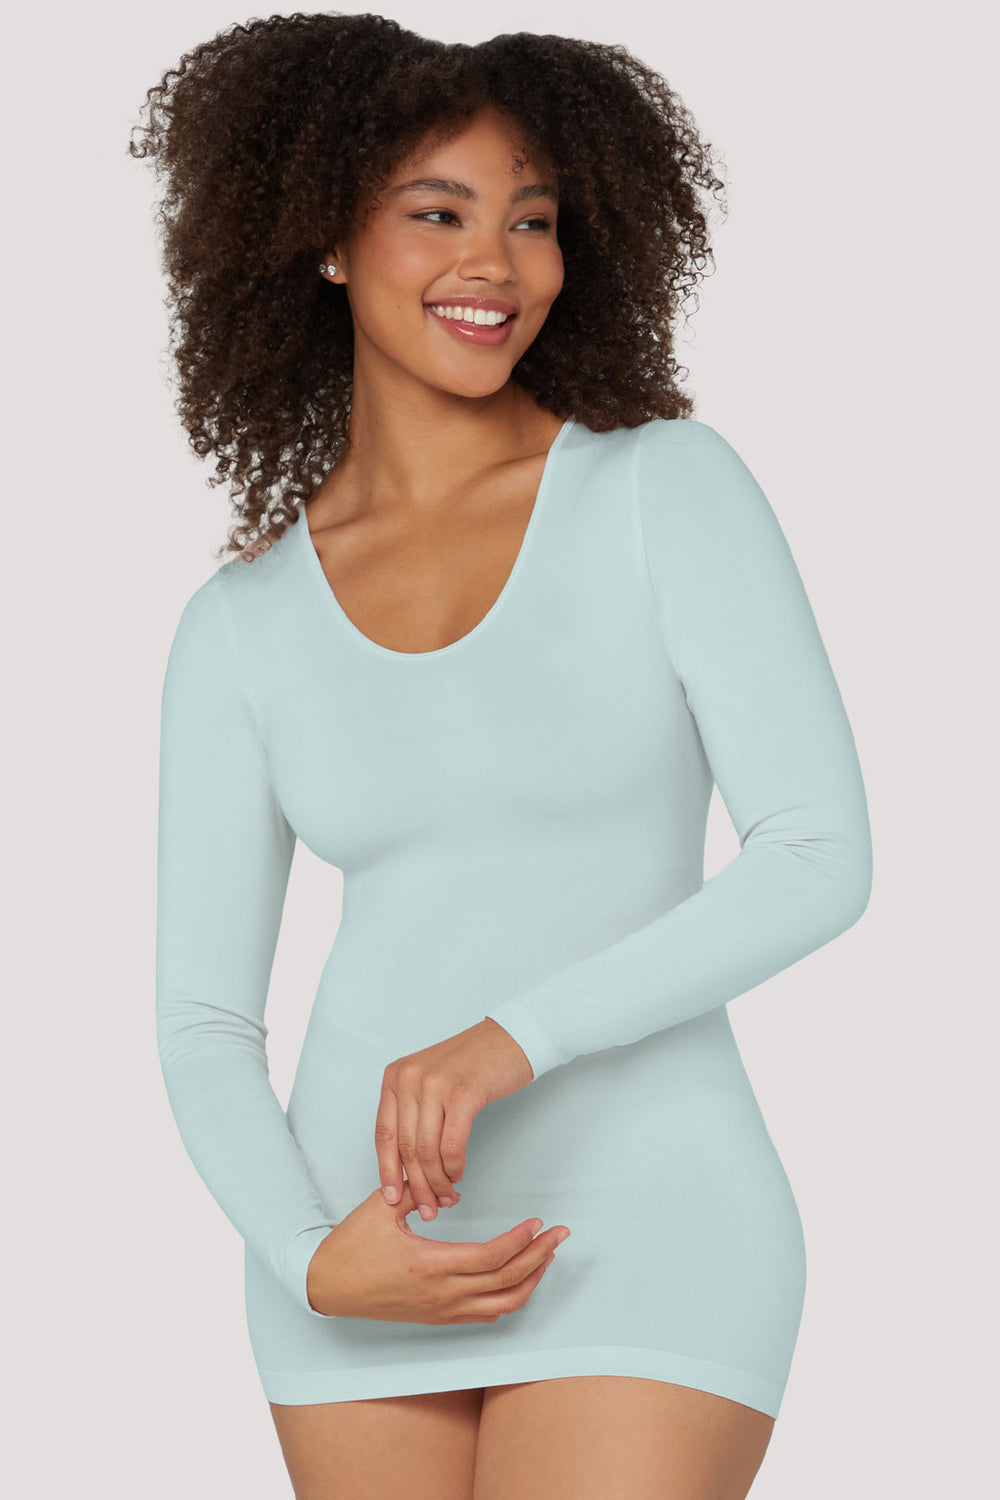 Women's Shapewear - suggestions curated by @bellabodies